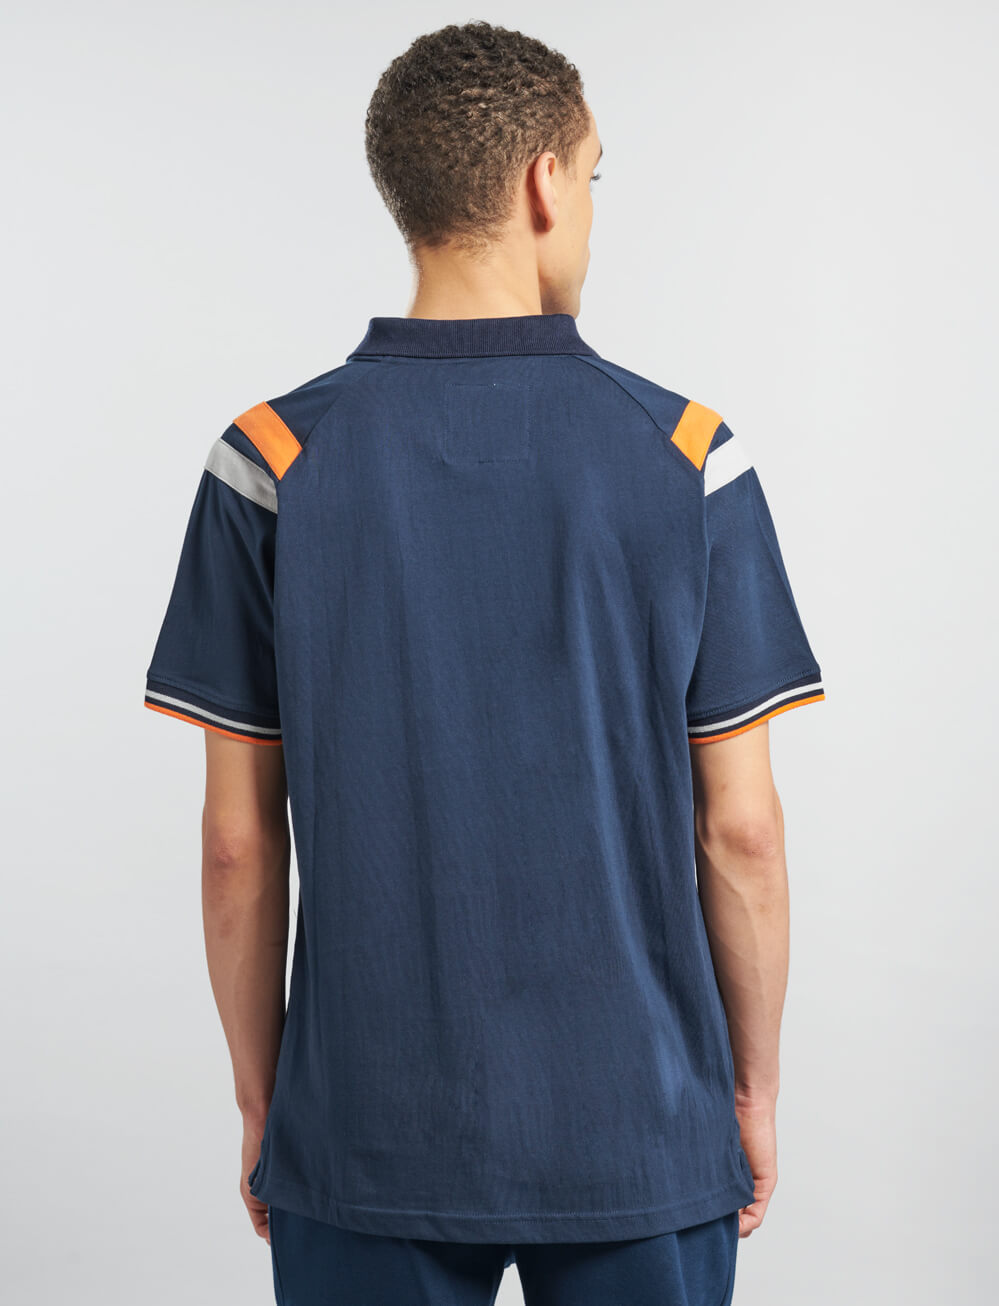 Official Chelsea Zip Neck Polo - Navy - The World Football Store